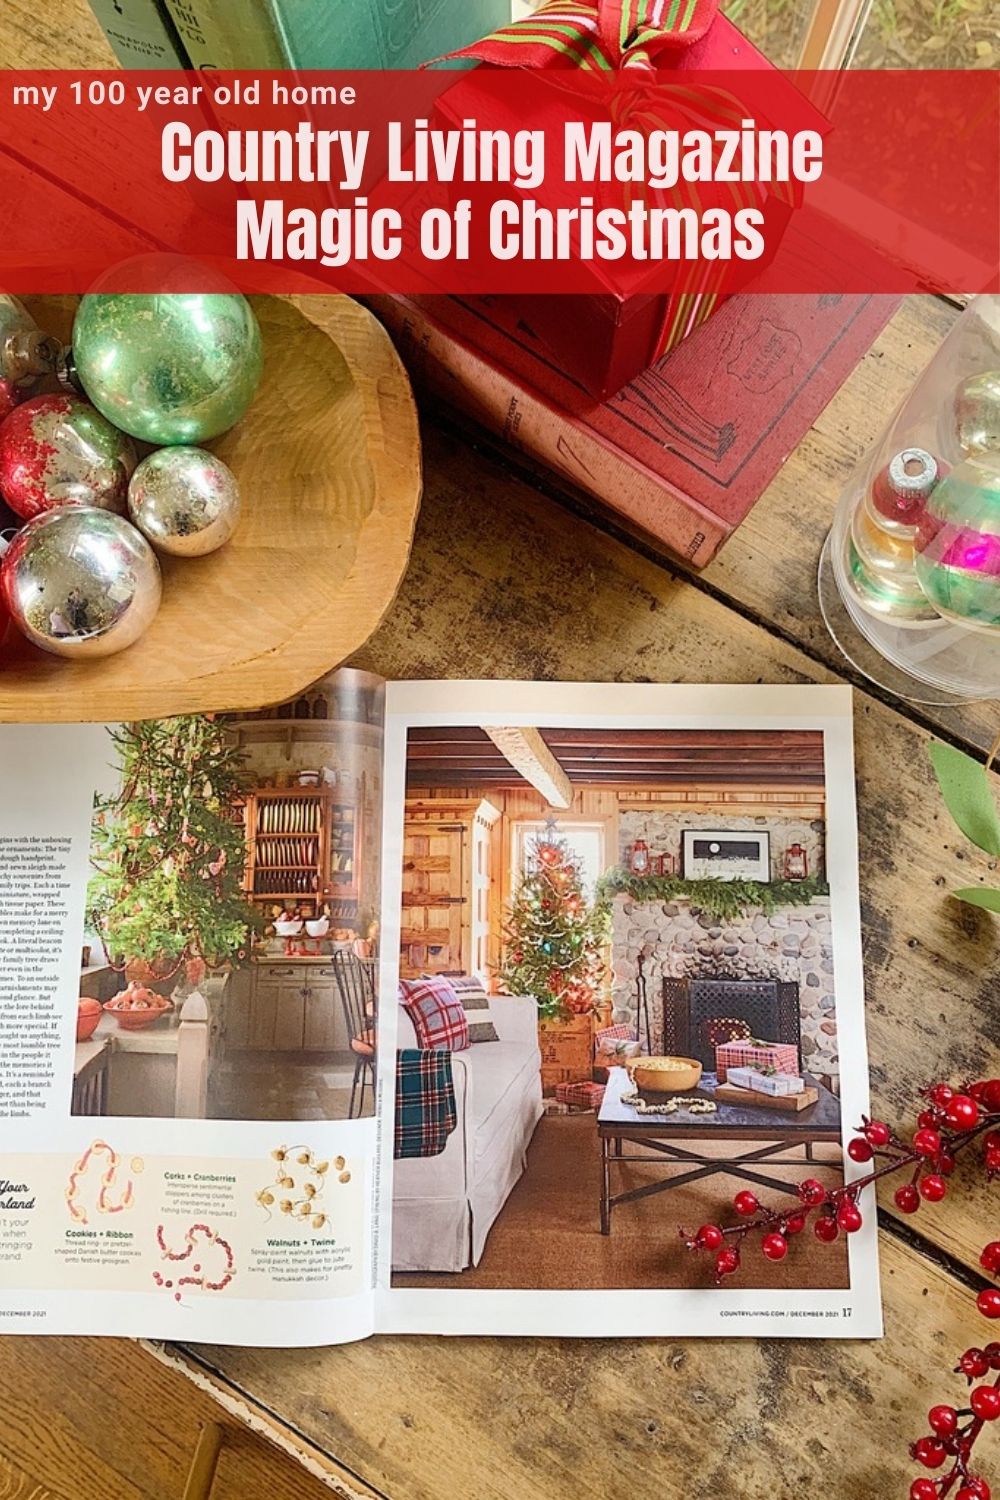 One of my favorite magazines has always been Country Living Magazine. Find a comfy spot and a cozy blanket to sink into the December issue!